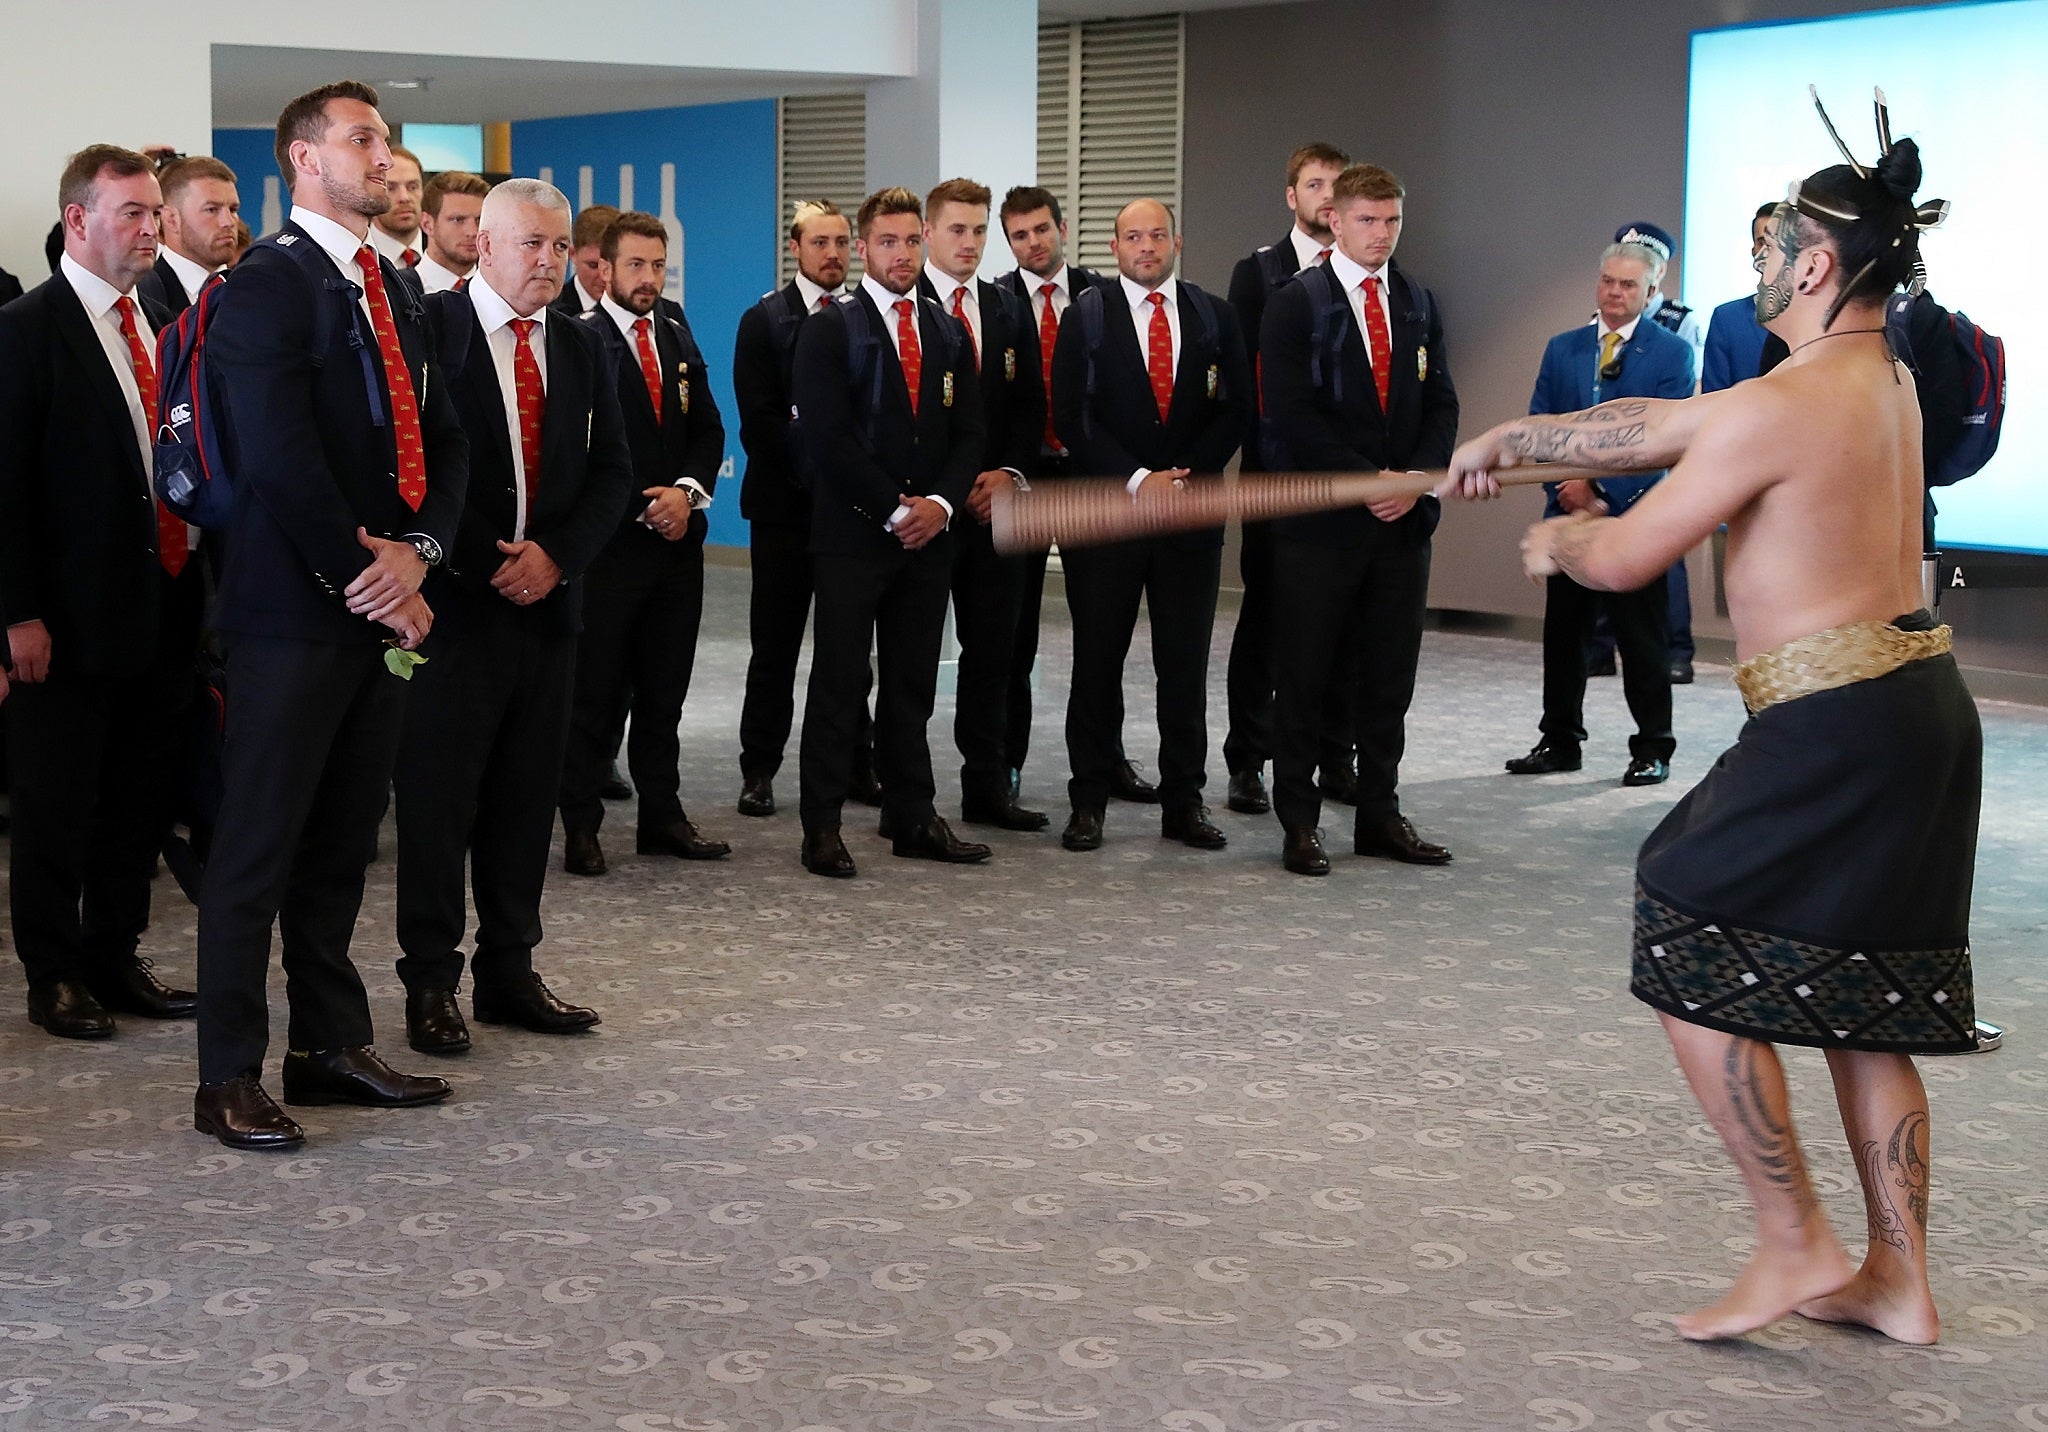 The Lions squad were given a Maori welcome in Auckland